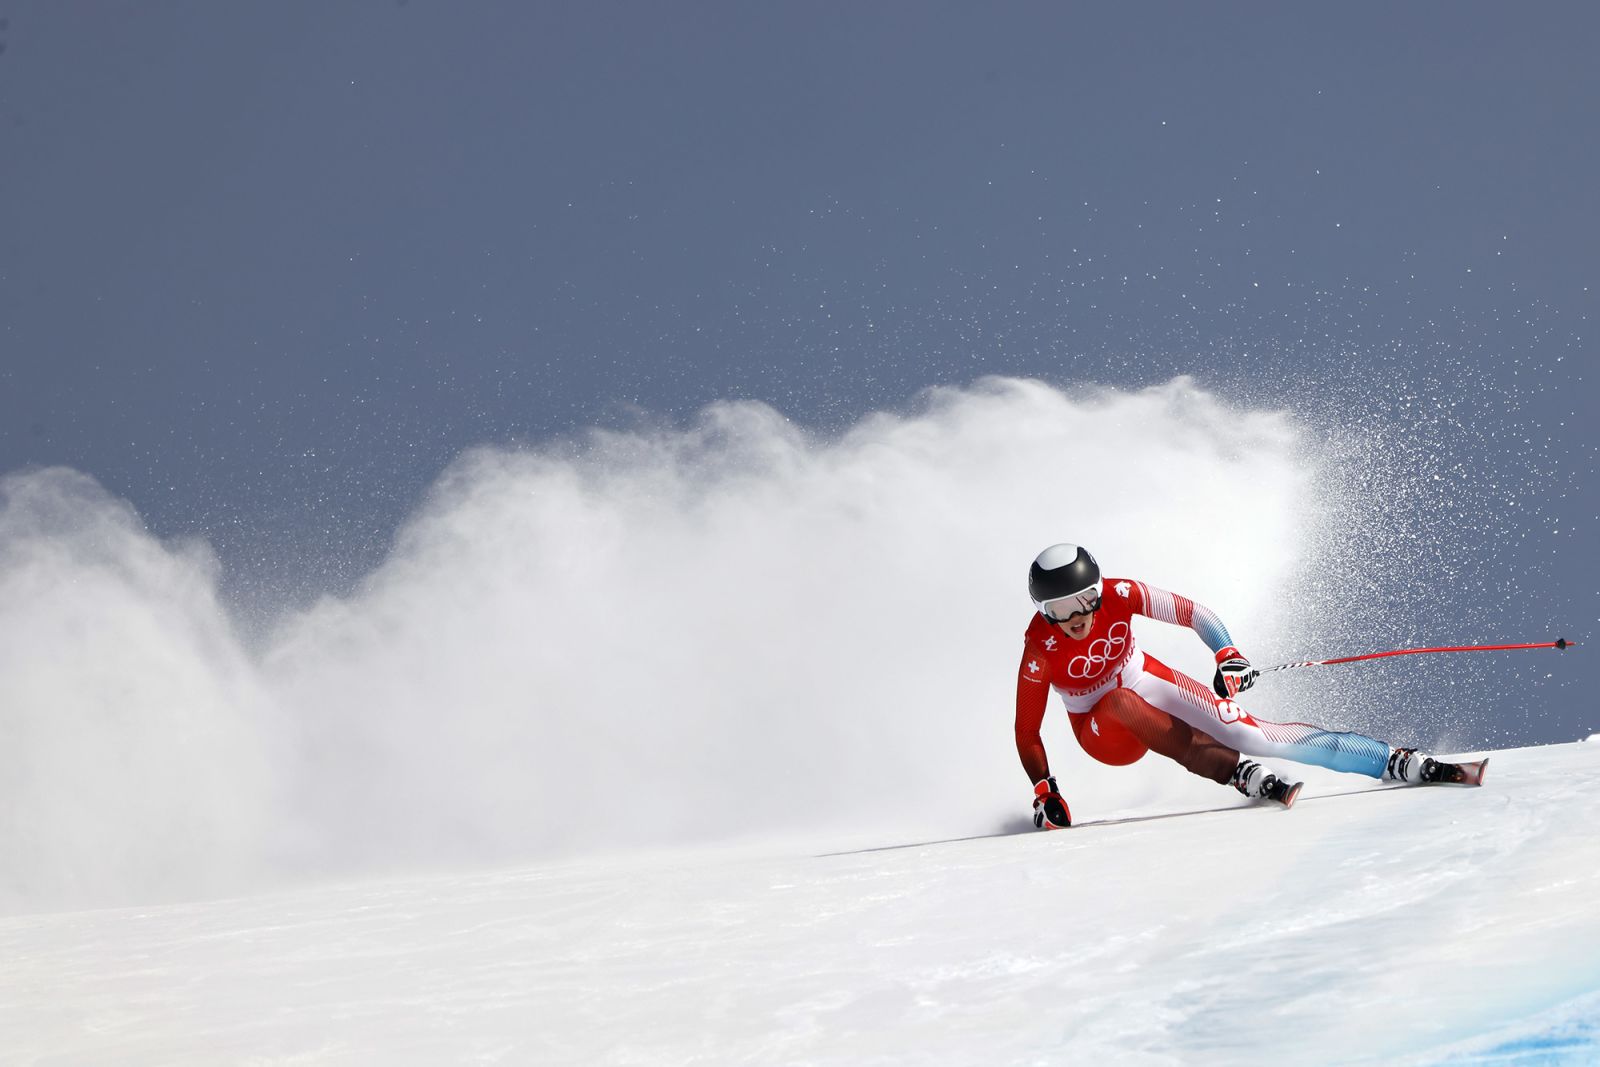 Swiss skier Michelle Gisin competes in the downhill portion of the combined event, which she won for the second straight Olympics. Gisin was twelfth after the downhill but dominated in the slalom to move into first.